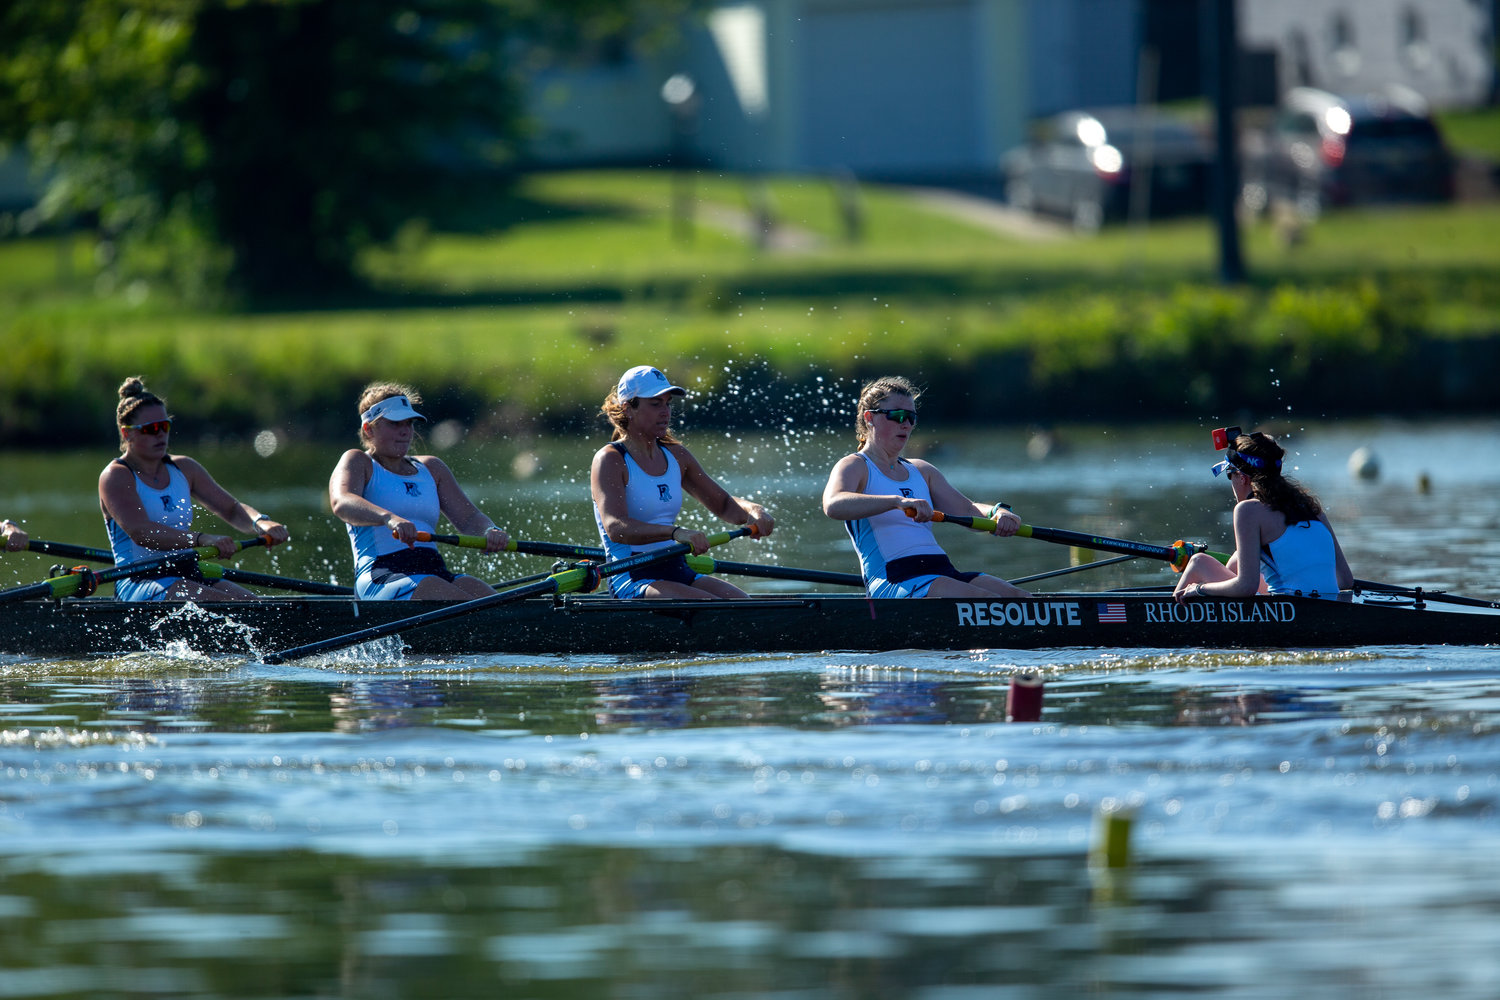 Barrington’s Julia Fortin (fourth rower from the left) is shown competing for the URI Women’s Crew team. Initially she made the URI team as a walk-on.